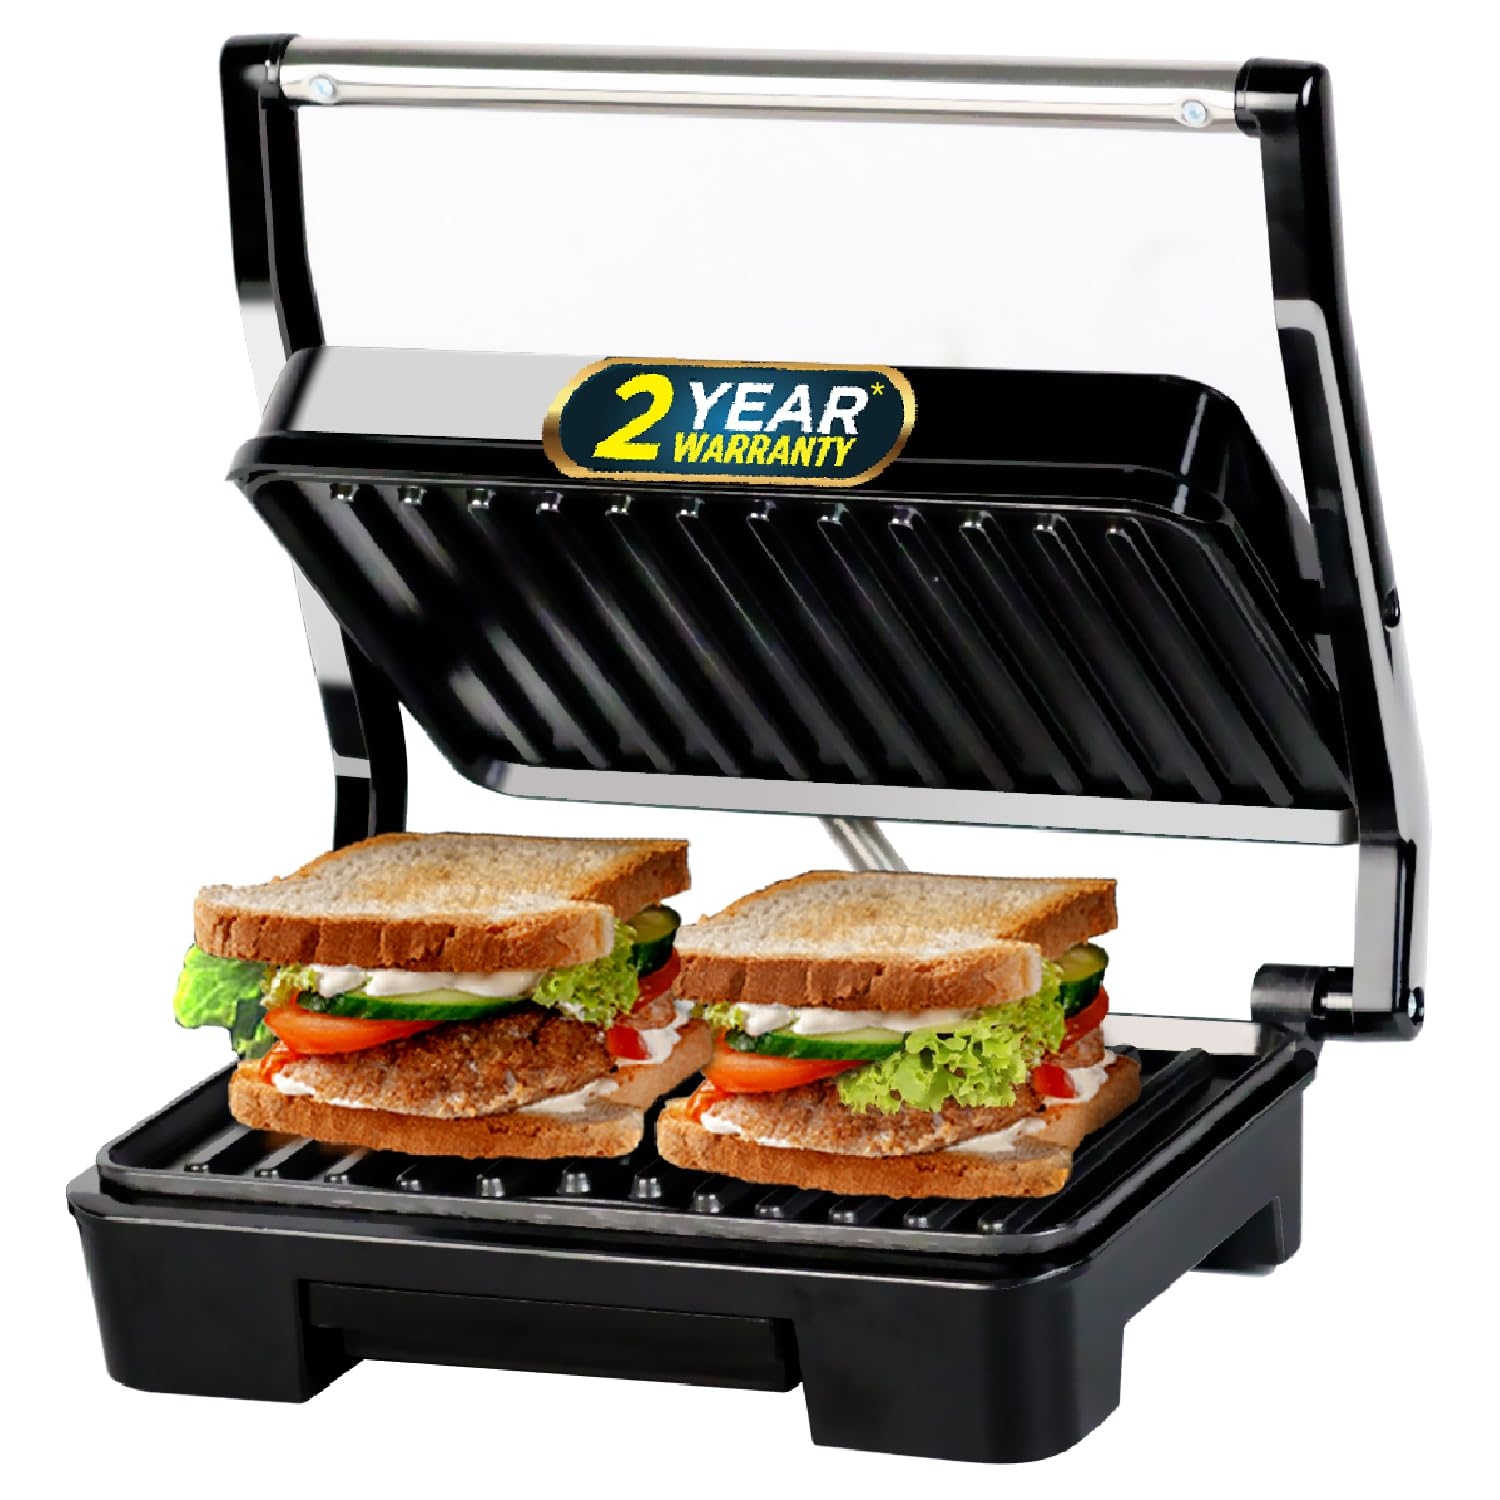 iBELL SM1515 Sandwich Maker with Floating Hinges, 1000Watt, Panini/Grill/Toast